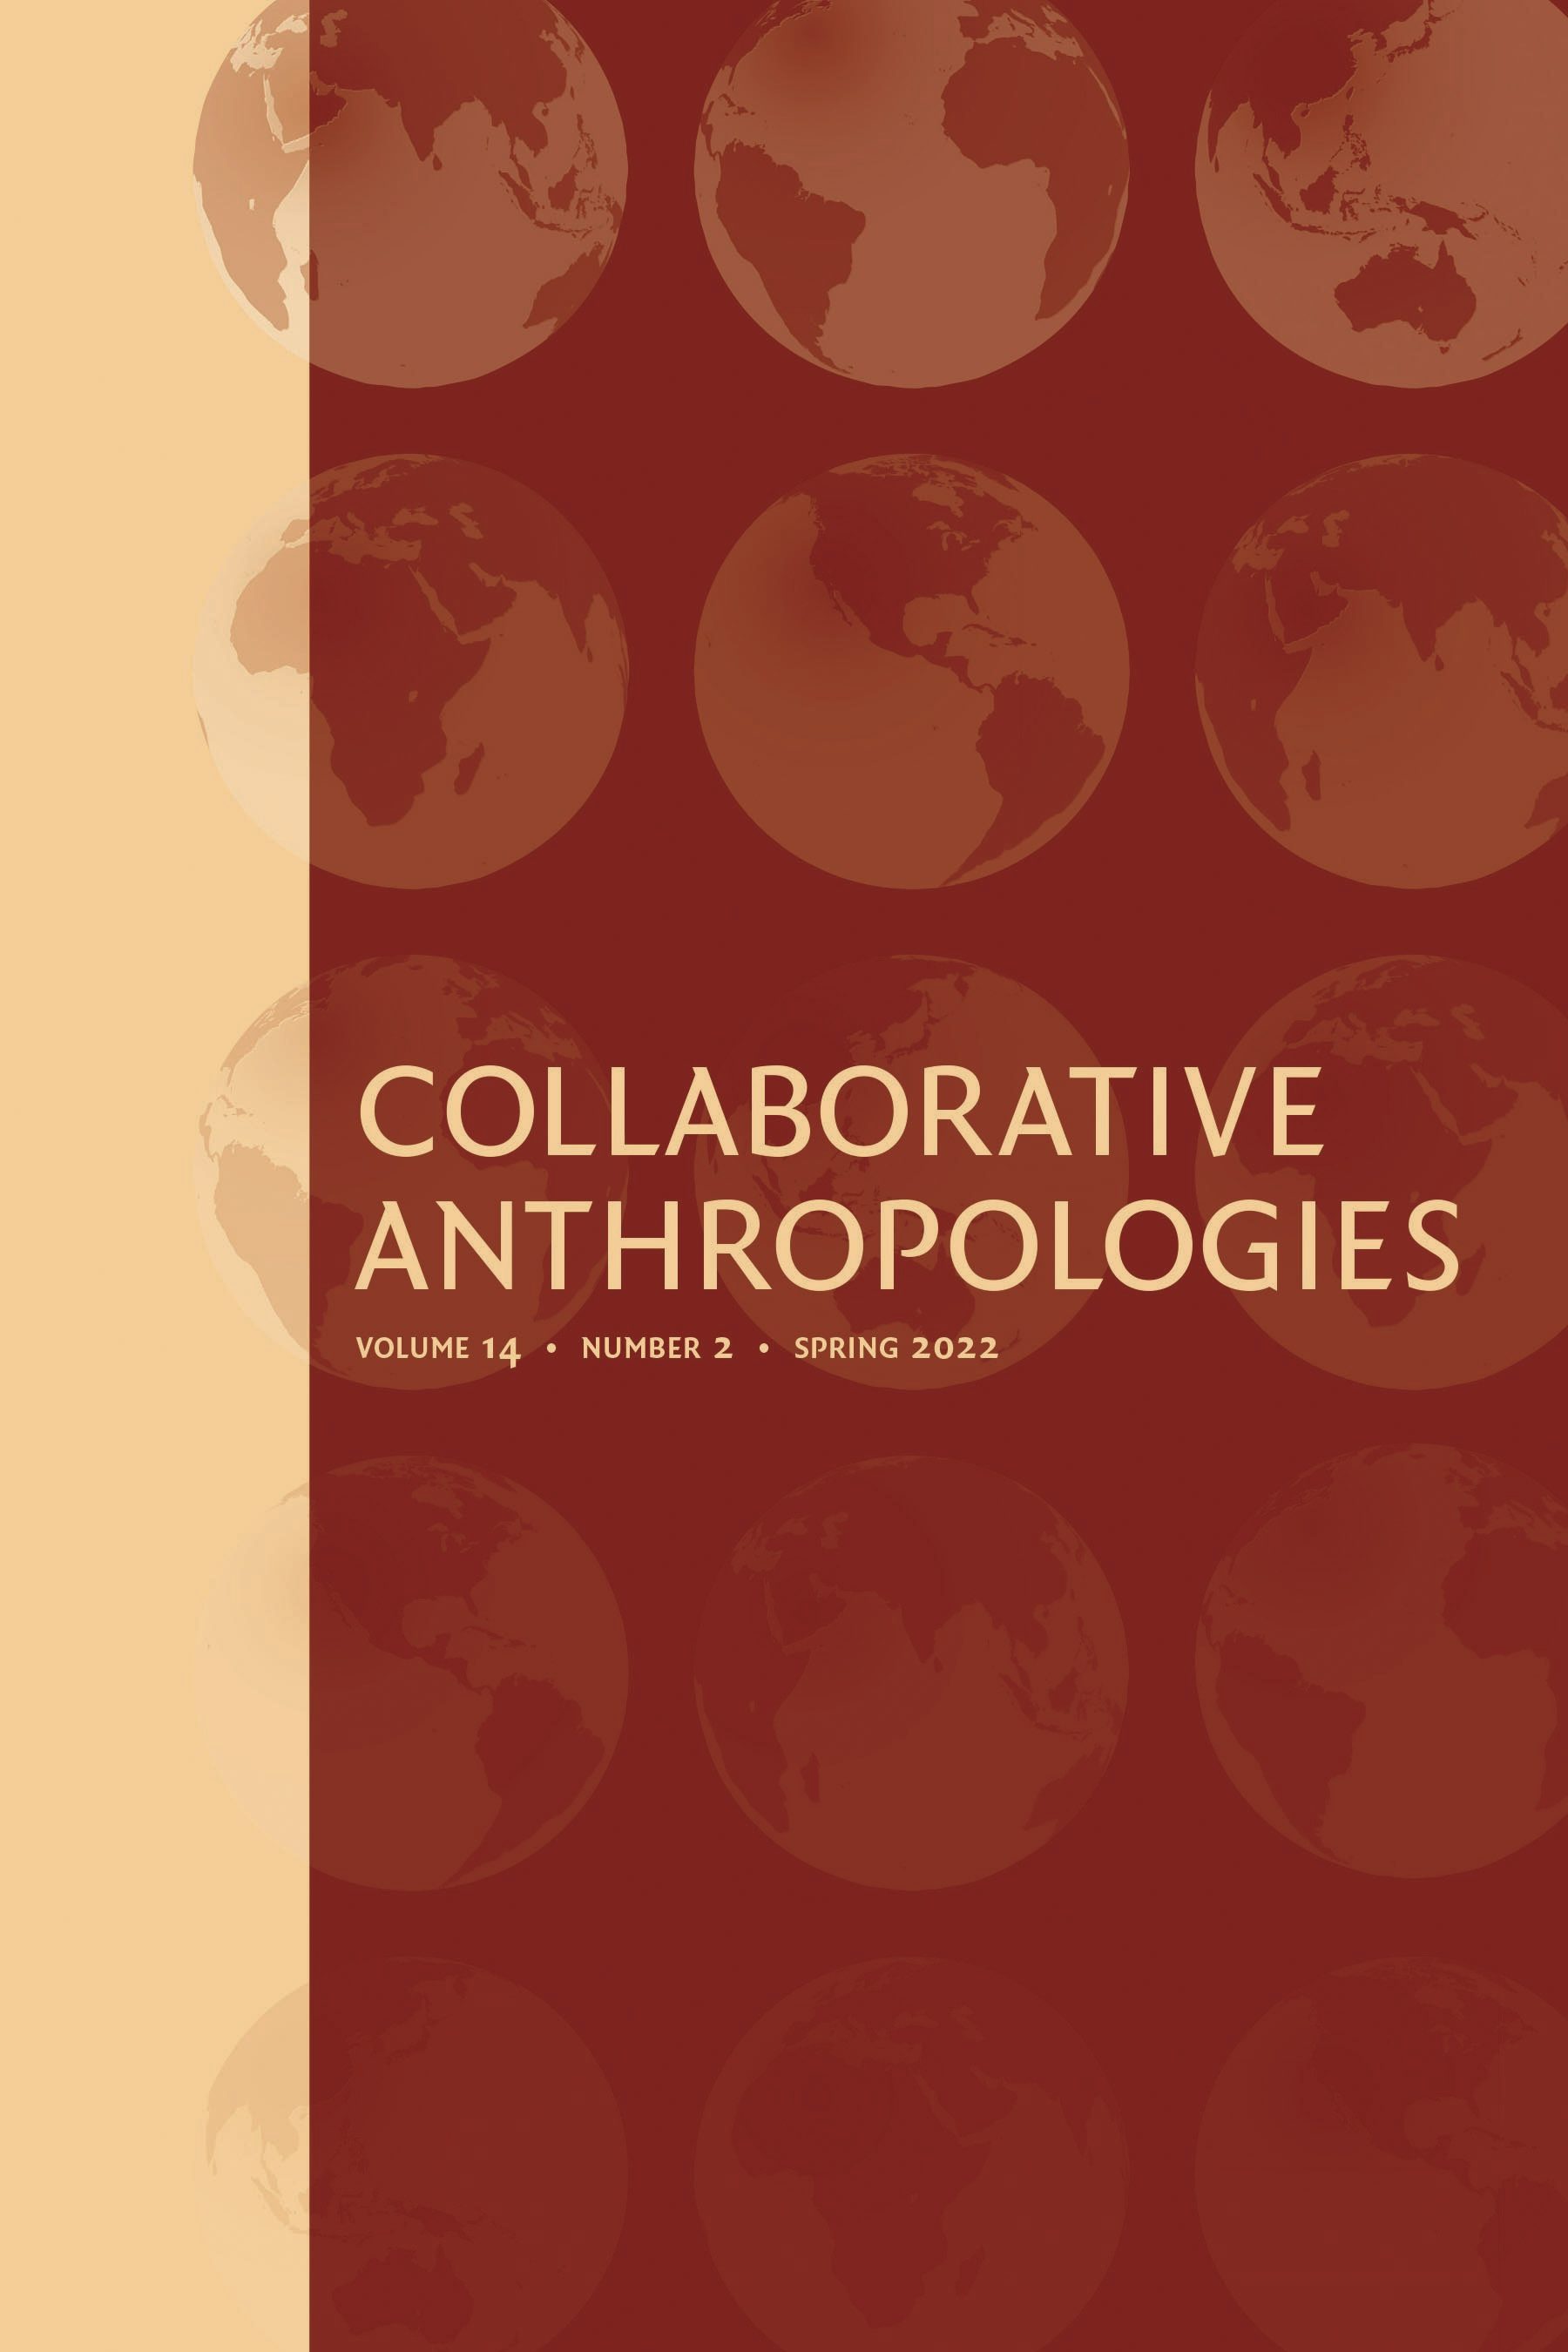 Cover of Collaborative Anthropologies. Features a graphic of several hemispheric views of Earth from different angles.